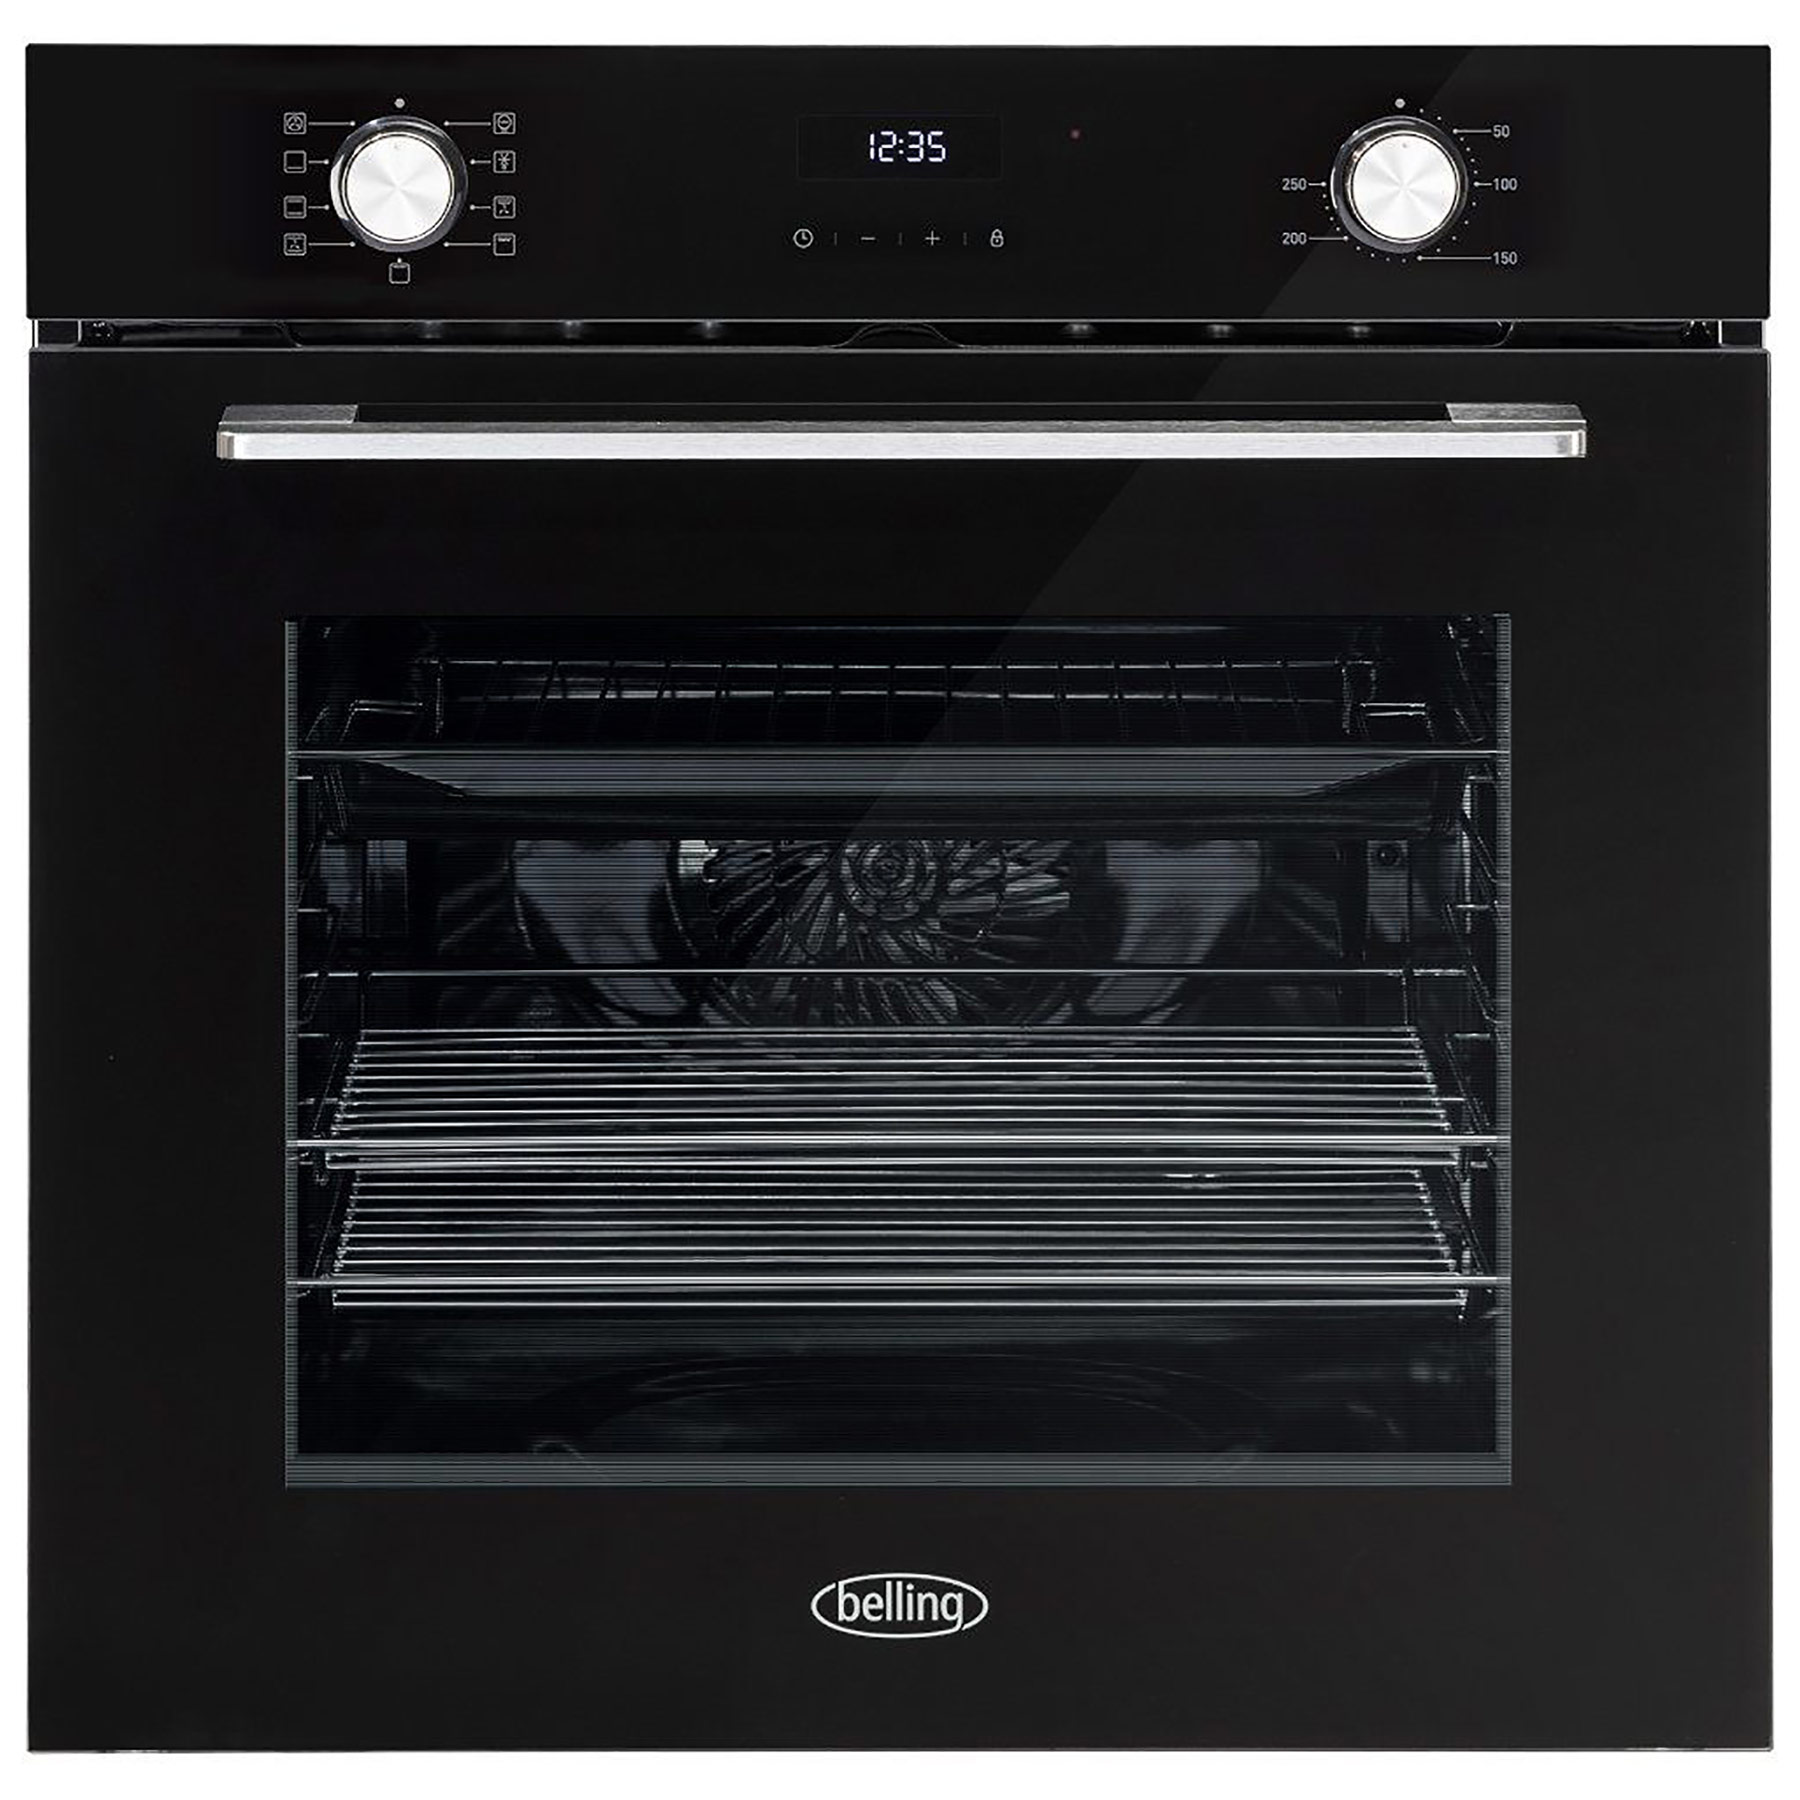 Belling 444411626 Built In Electric Single Oven in Black 72L A Rated